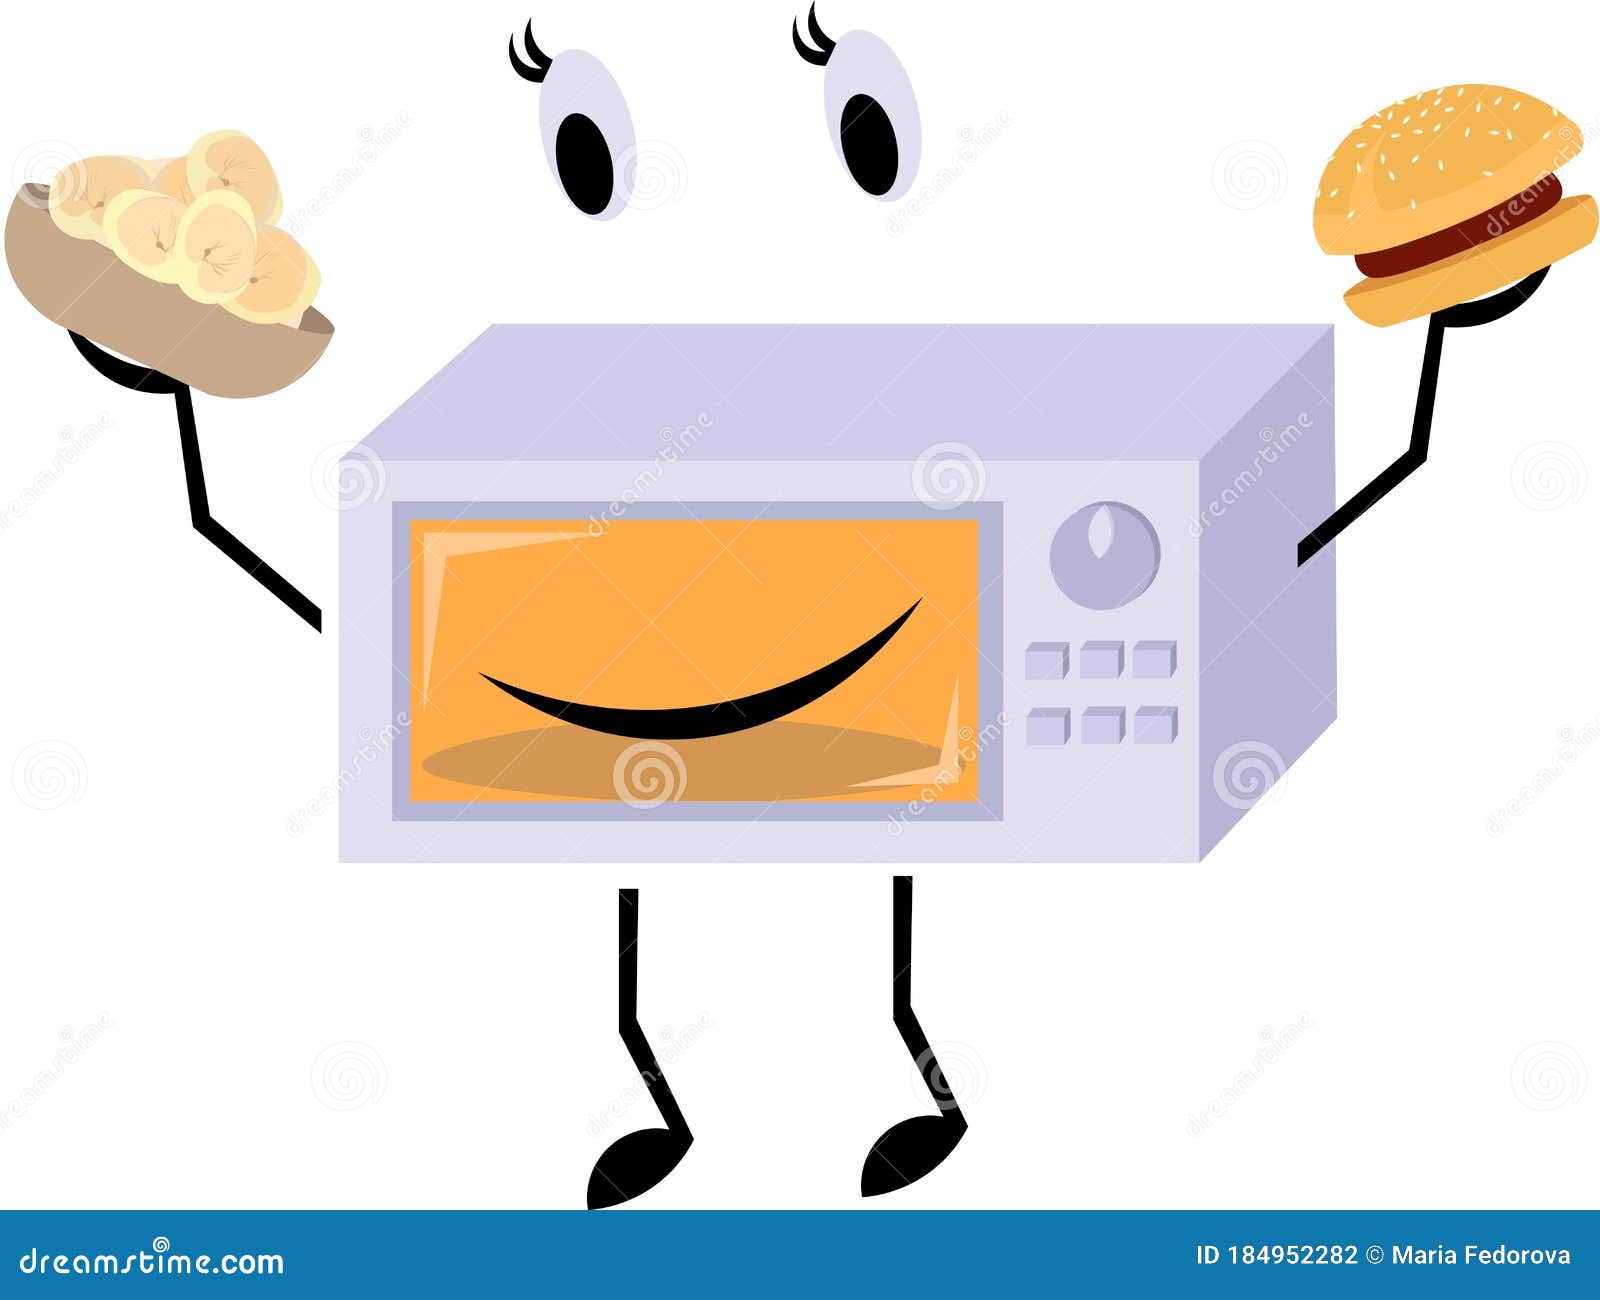 Cheerful Microwave with Arms and Legs. Dumplings and a Hamburger